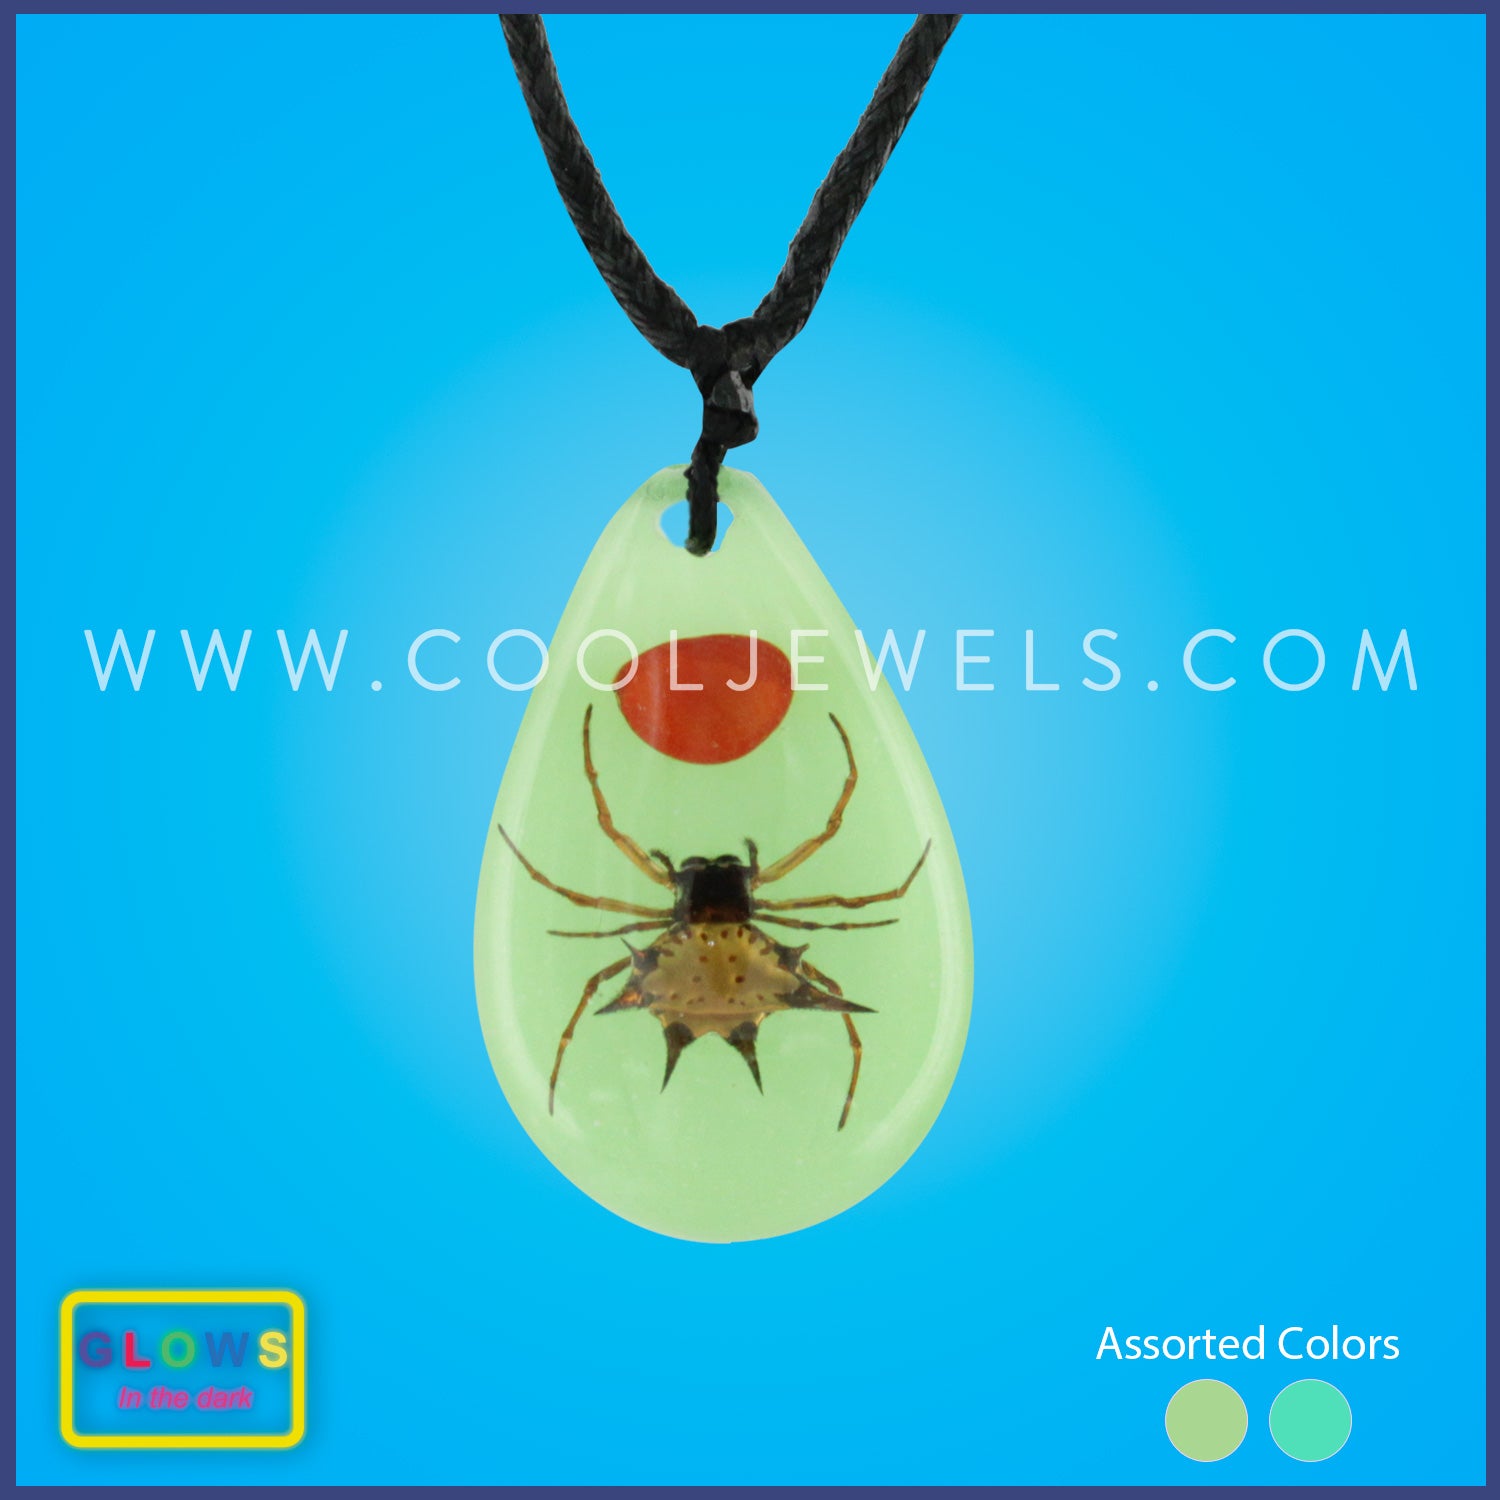 BLACK SLIDER CORD NECKLACE WITH GLOW-IN-THE-DARK SPIDER PENDANT